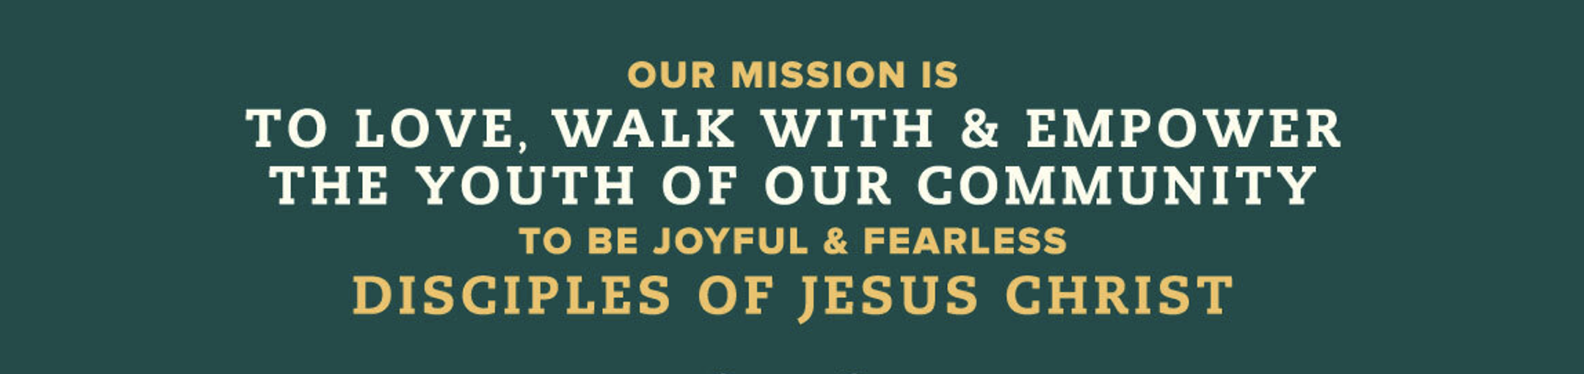 Our mission is to love, walk with and empower the youth in our community to be joyful and fearless disciples of Jesus Christ